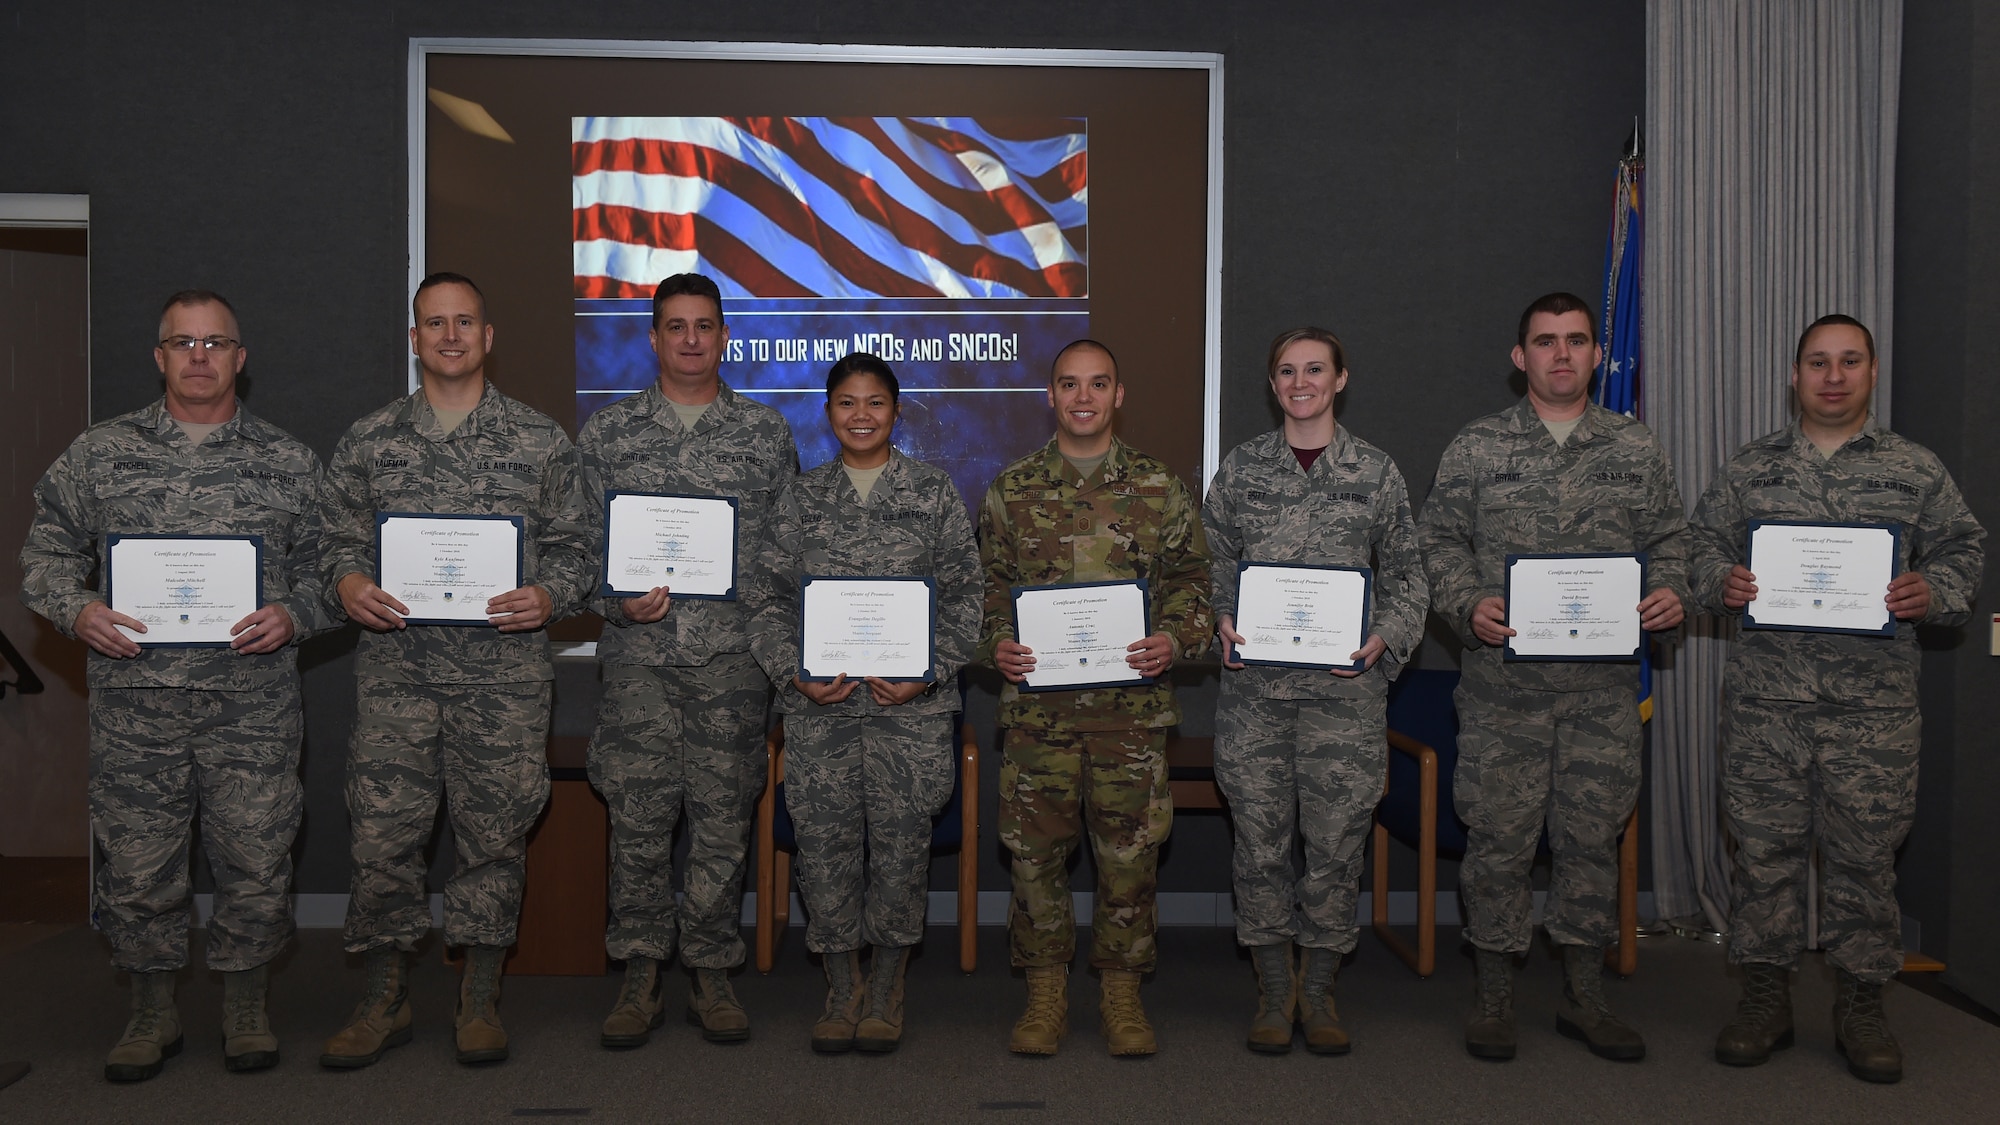 99 Grissom Airmen inducted into rank of NCO, SNCO